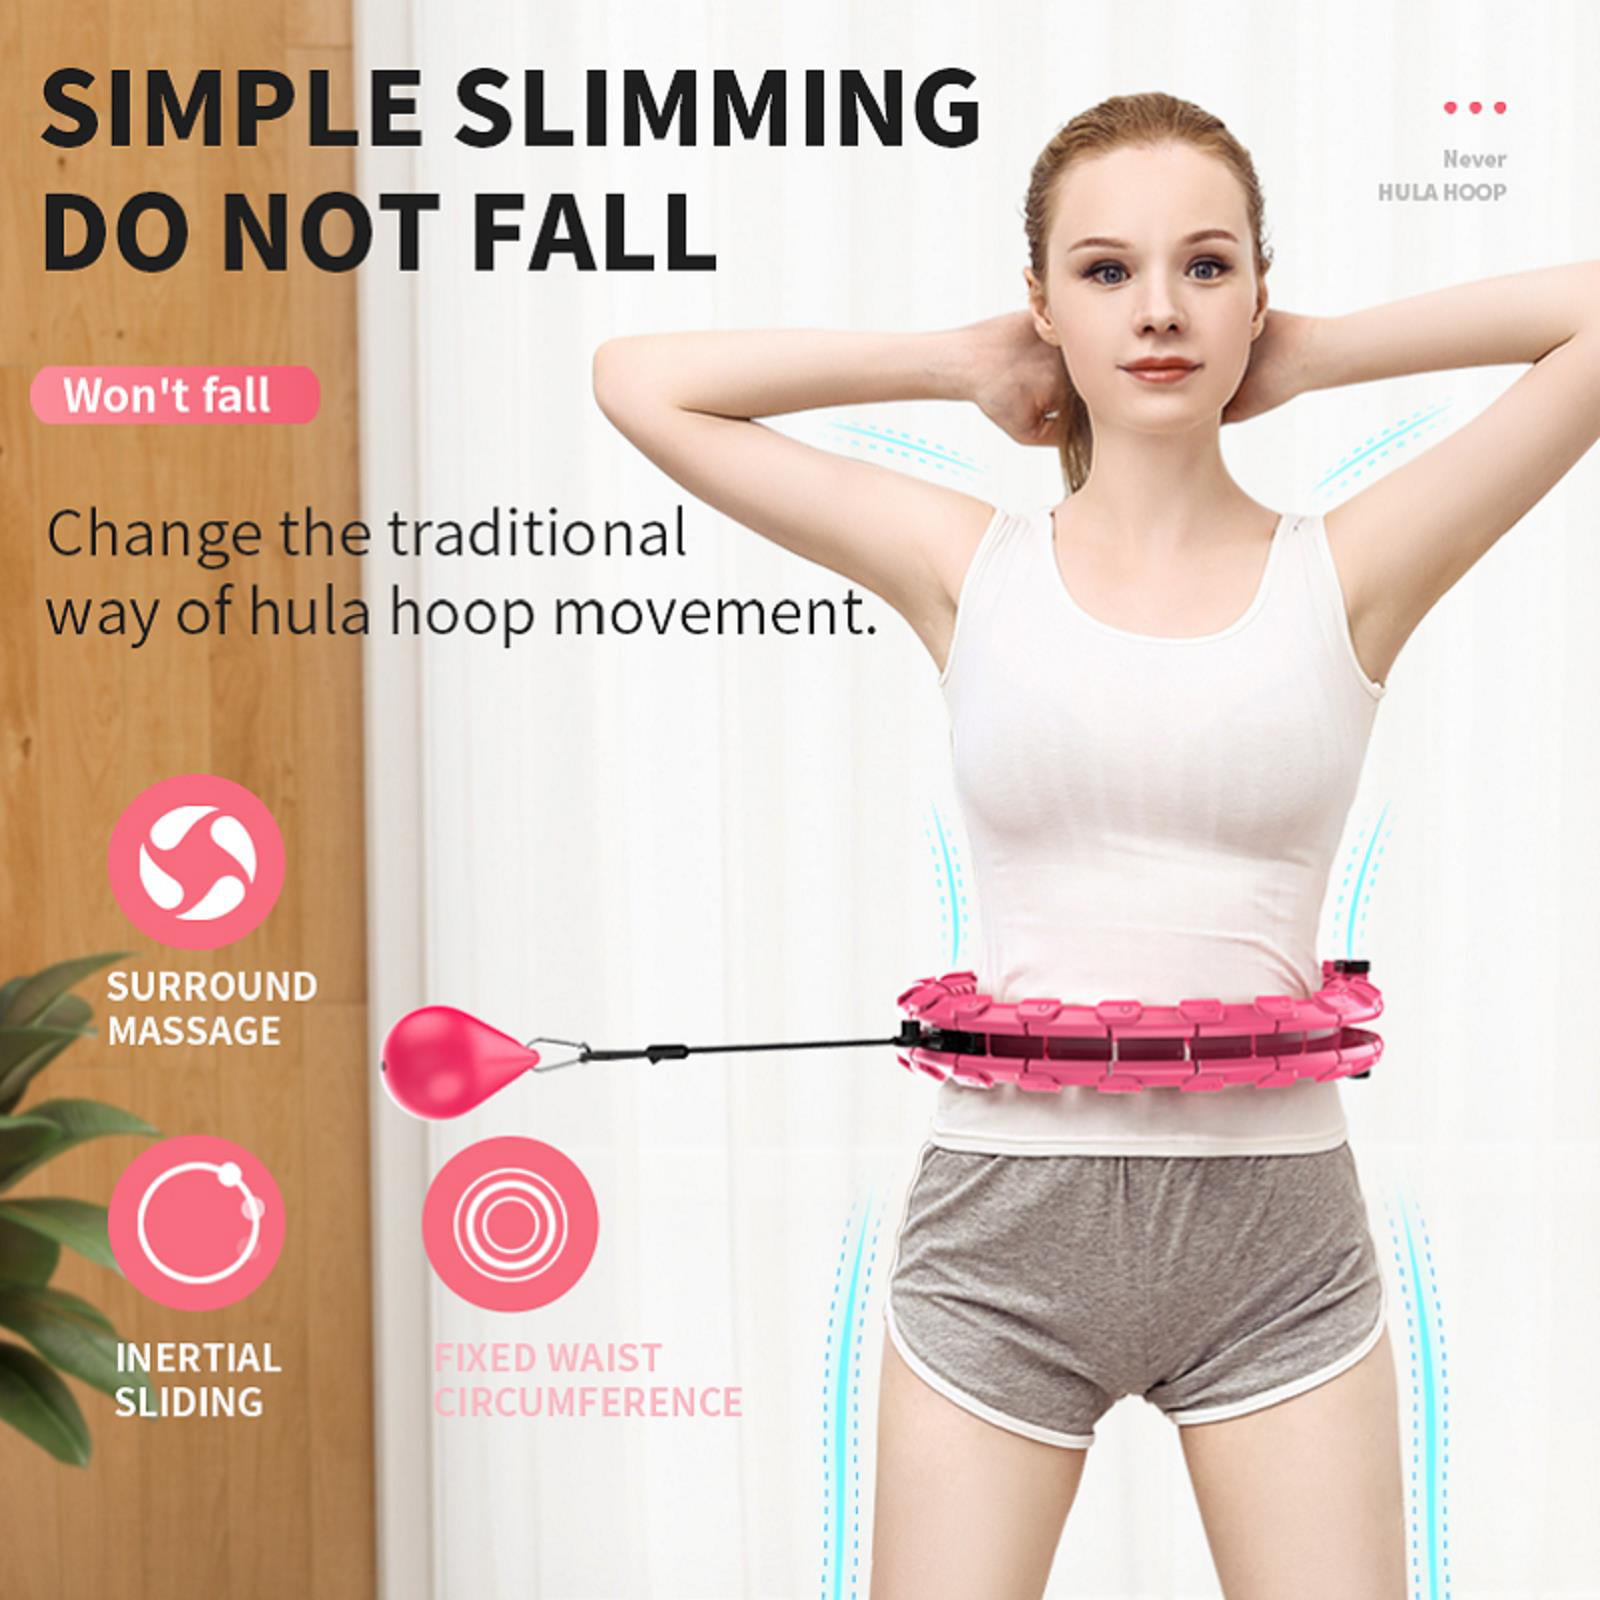 24 Detachable Knots Plus 4 Extra Sections Adjustable Hula Hoop UJoyFeel Weighted Hula Hoops Smart Fitness Hoops for Adults Weight Loss 2 in 1 Abdomen Fitness Message Non Fall Auto Spinning Ball 